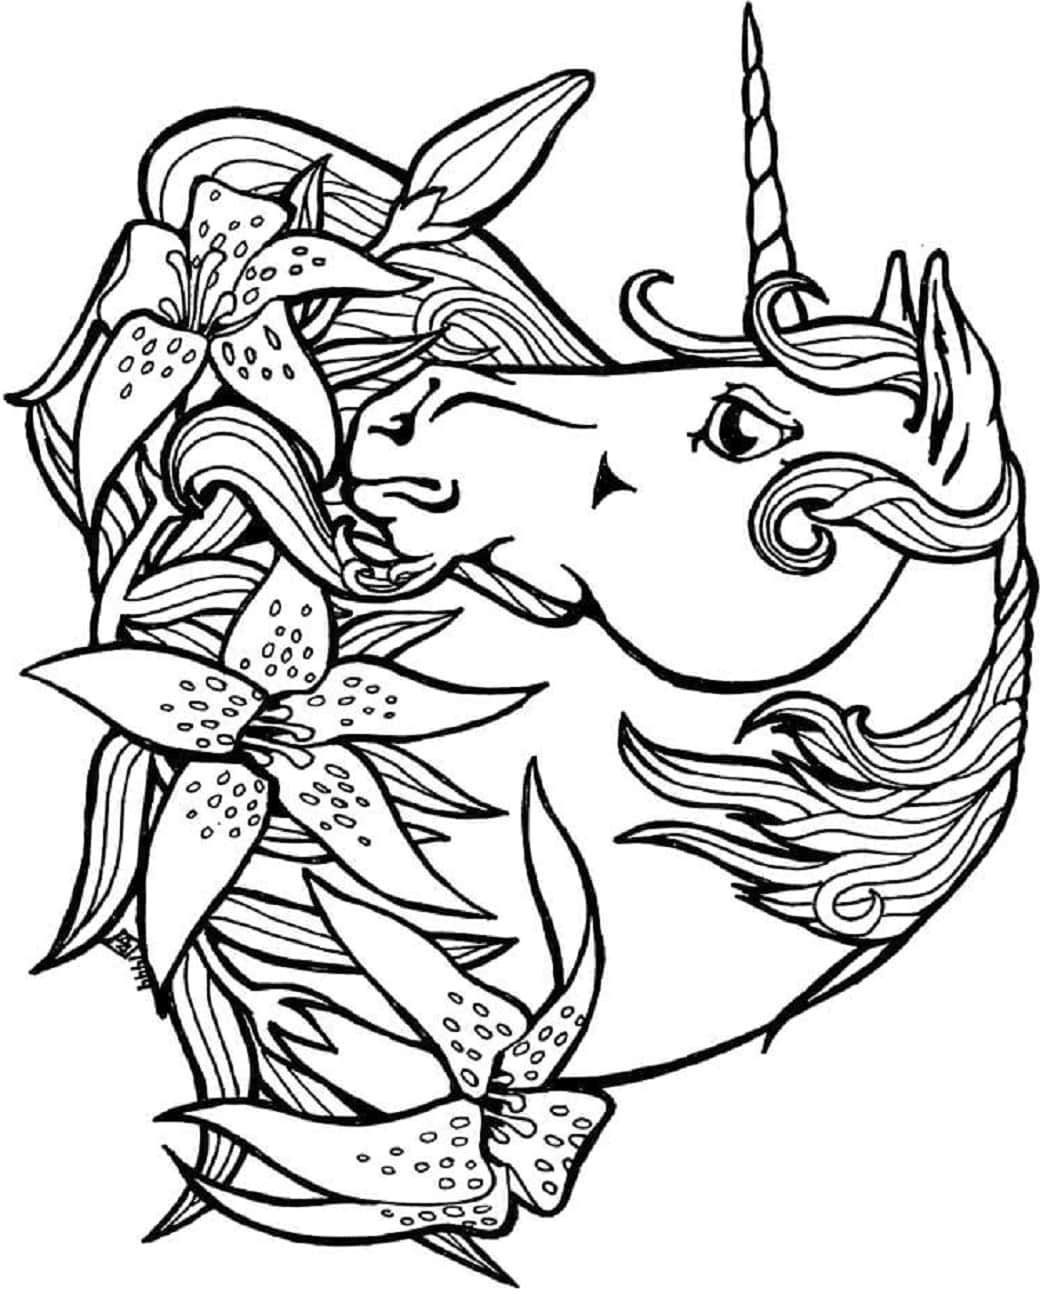 Unicorn Head And Flowers Coloring Page